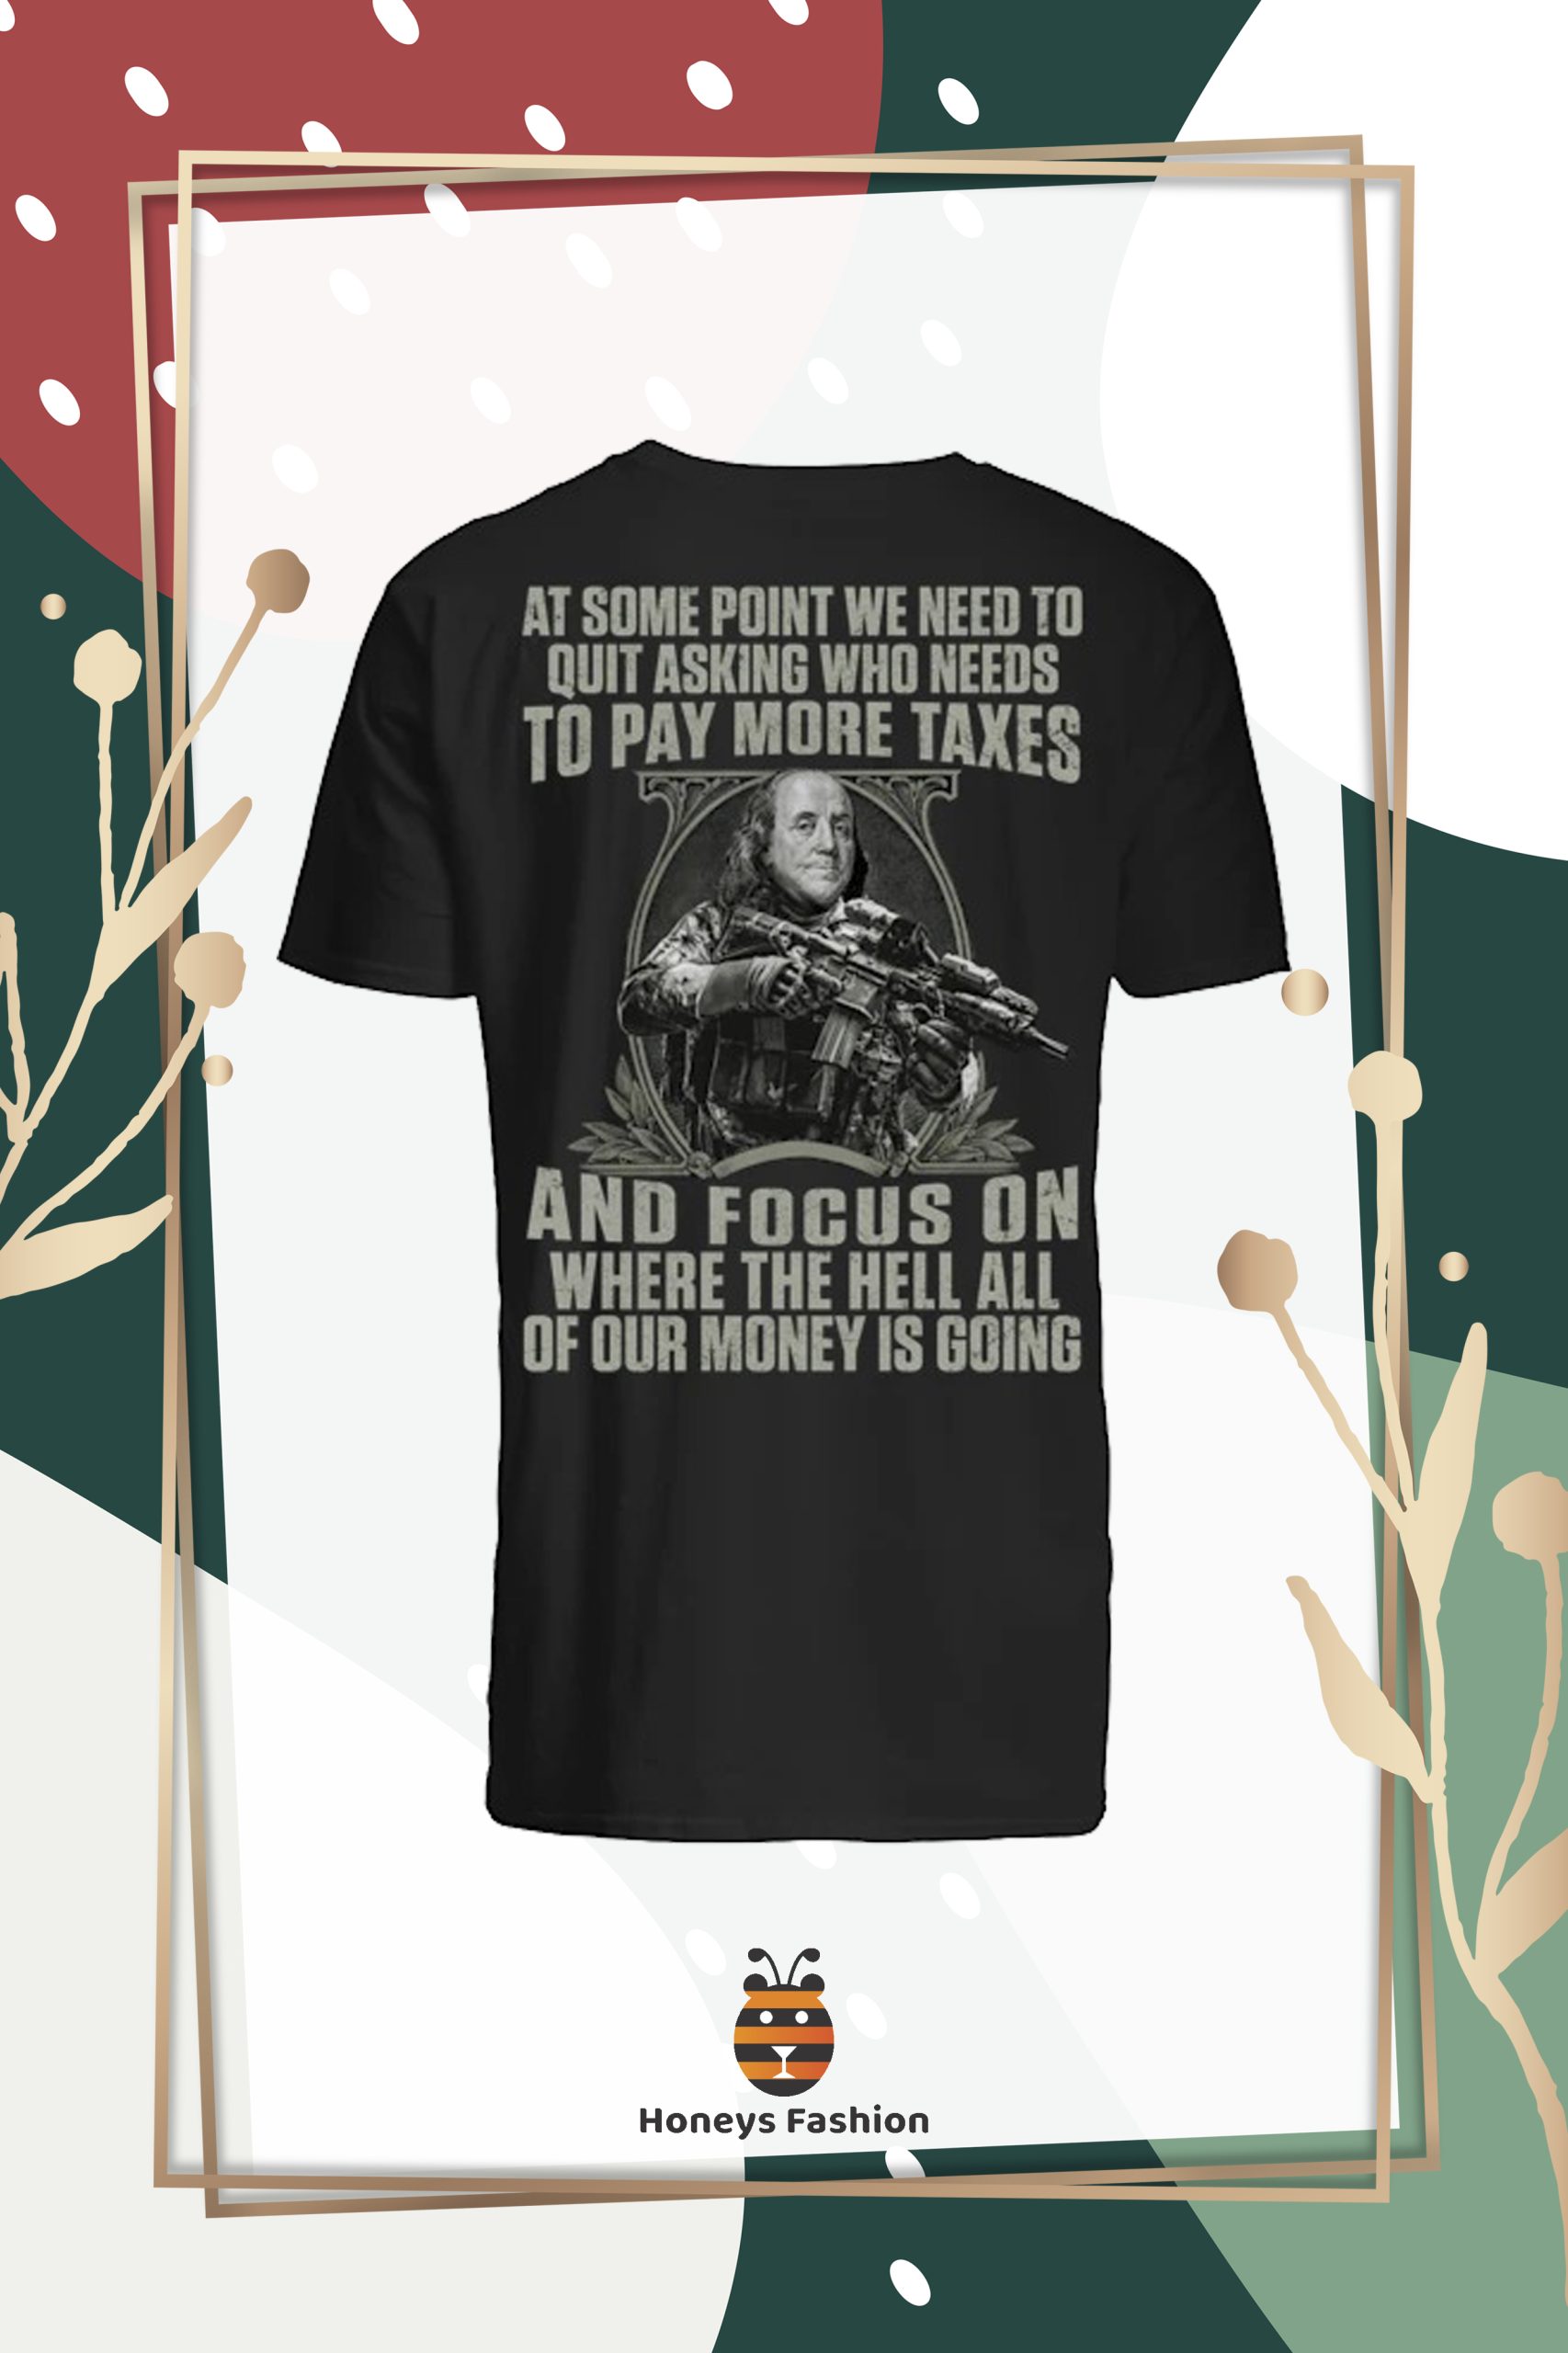 Our Money Is Going Classic Men’s T-shirt